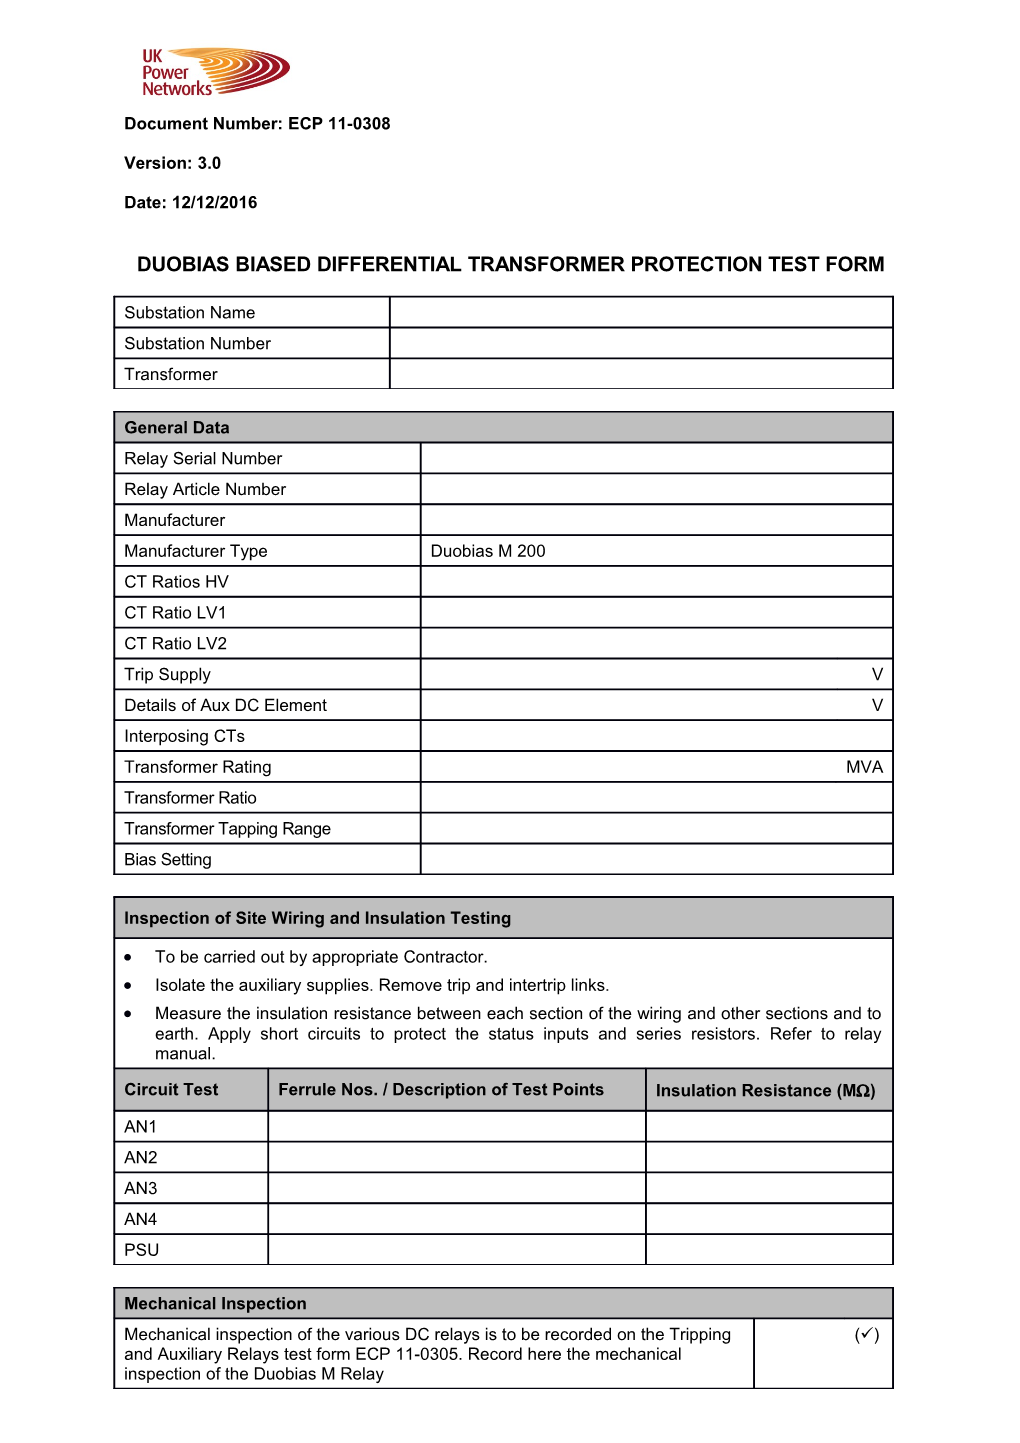 ECP 11-0308 DUOBIAS Biased Differential Transformer Protection Test Form